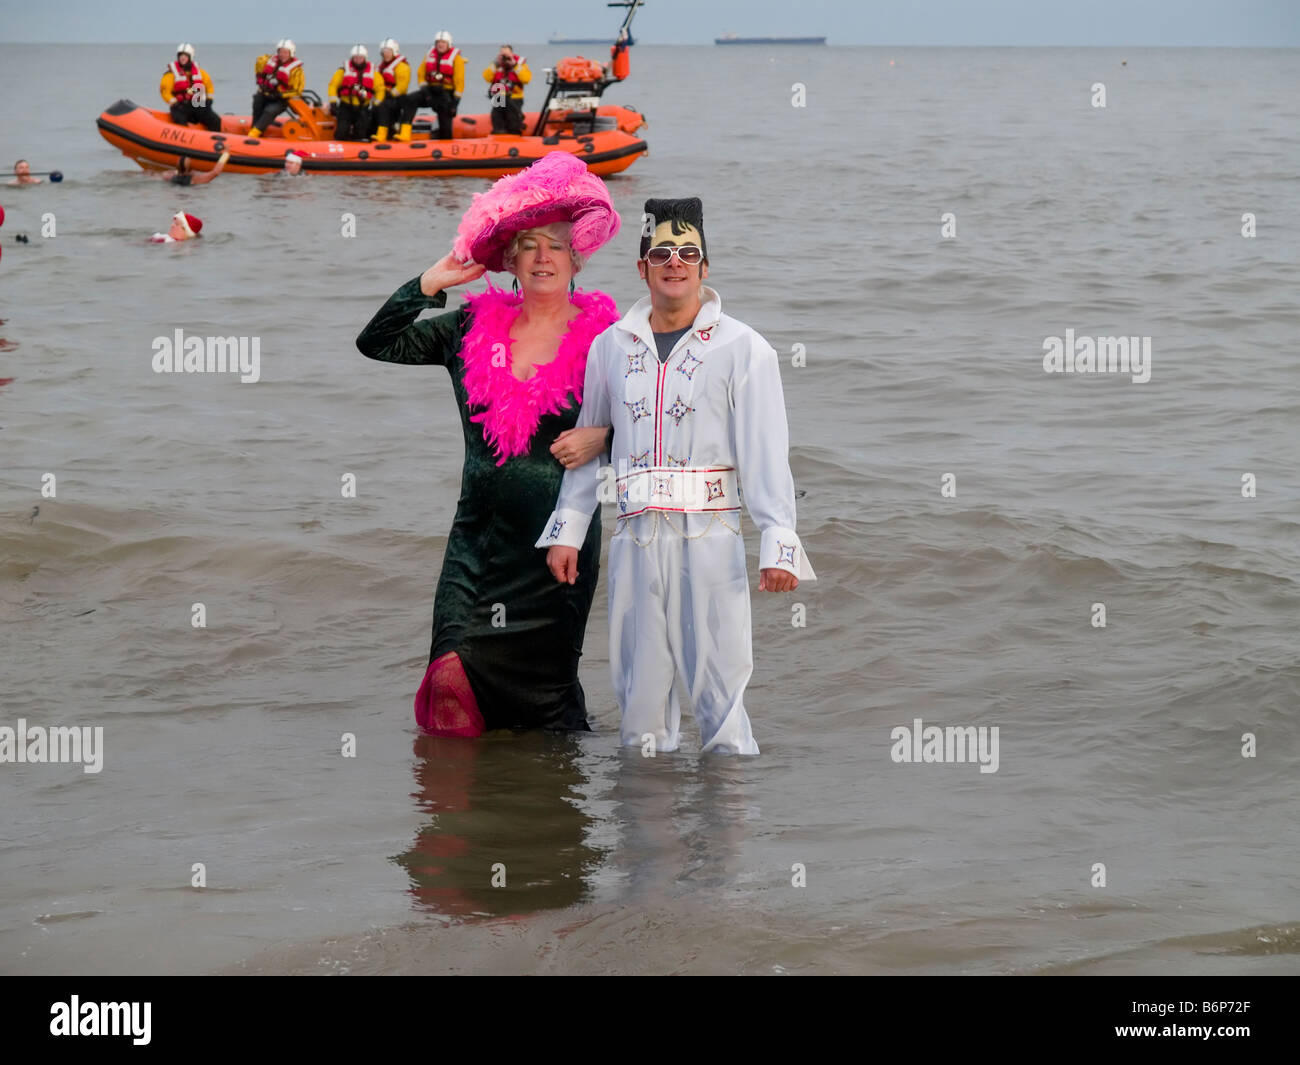 Bathers in the sea in a Boxing Day Charity swim in Redcar Cleveland UK Stock Photo